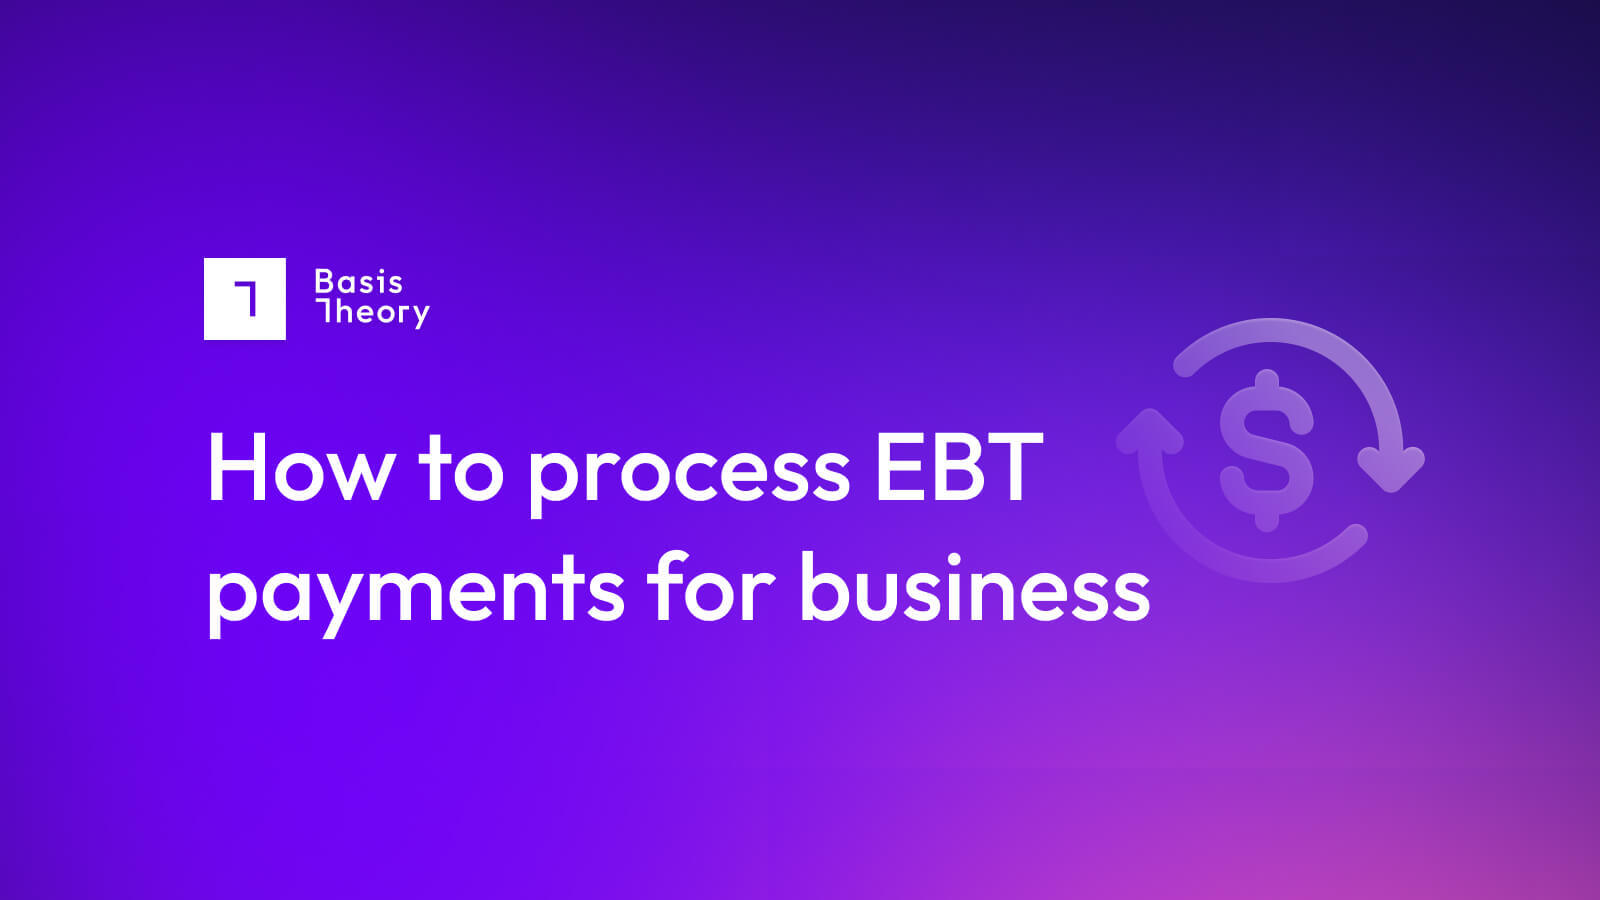 How businesses can process EBT payments